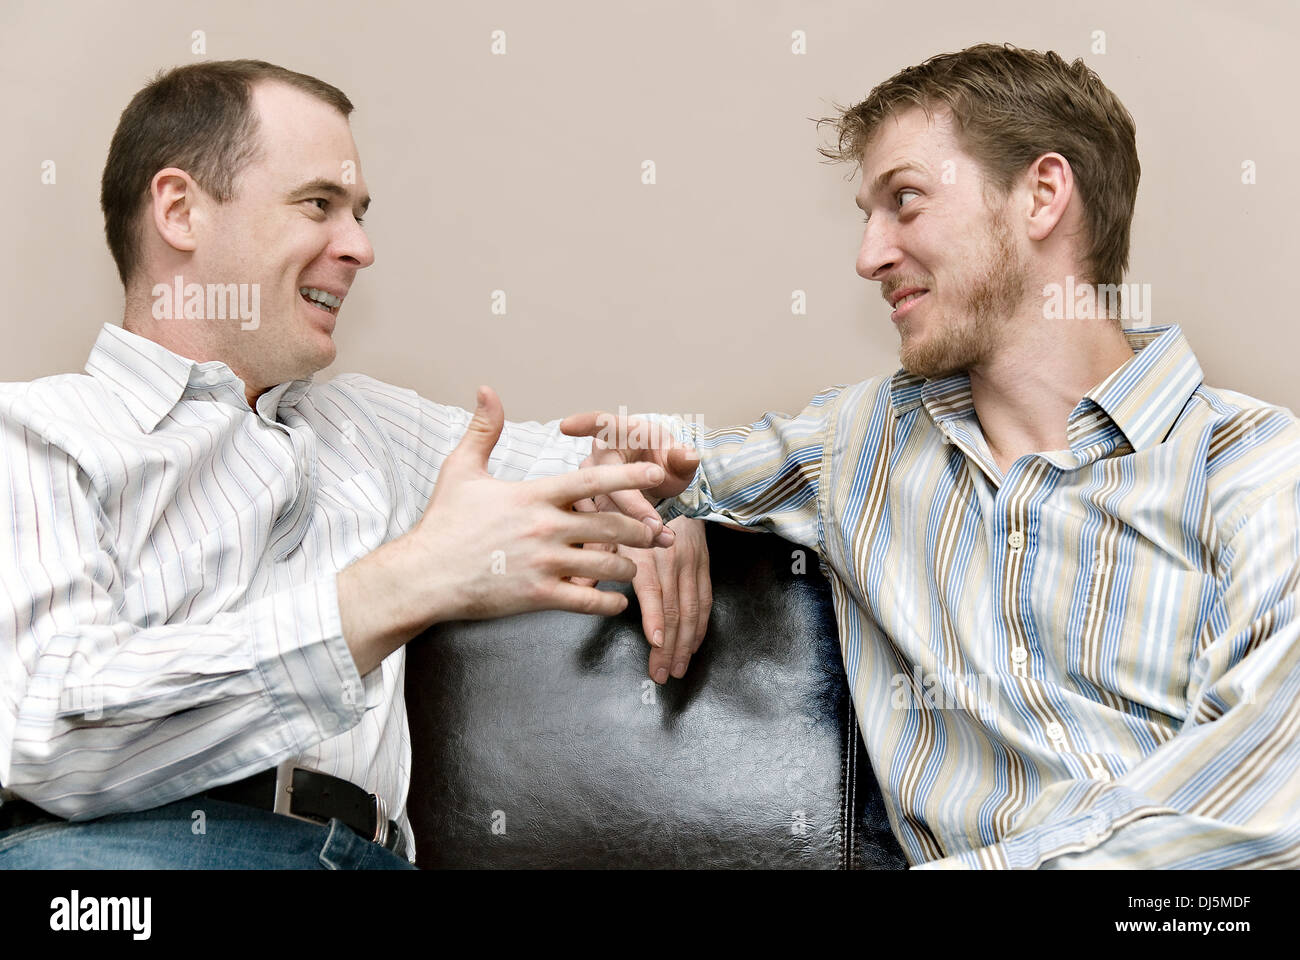 Discussion Stock Photo